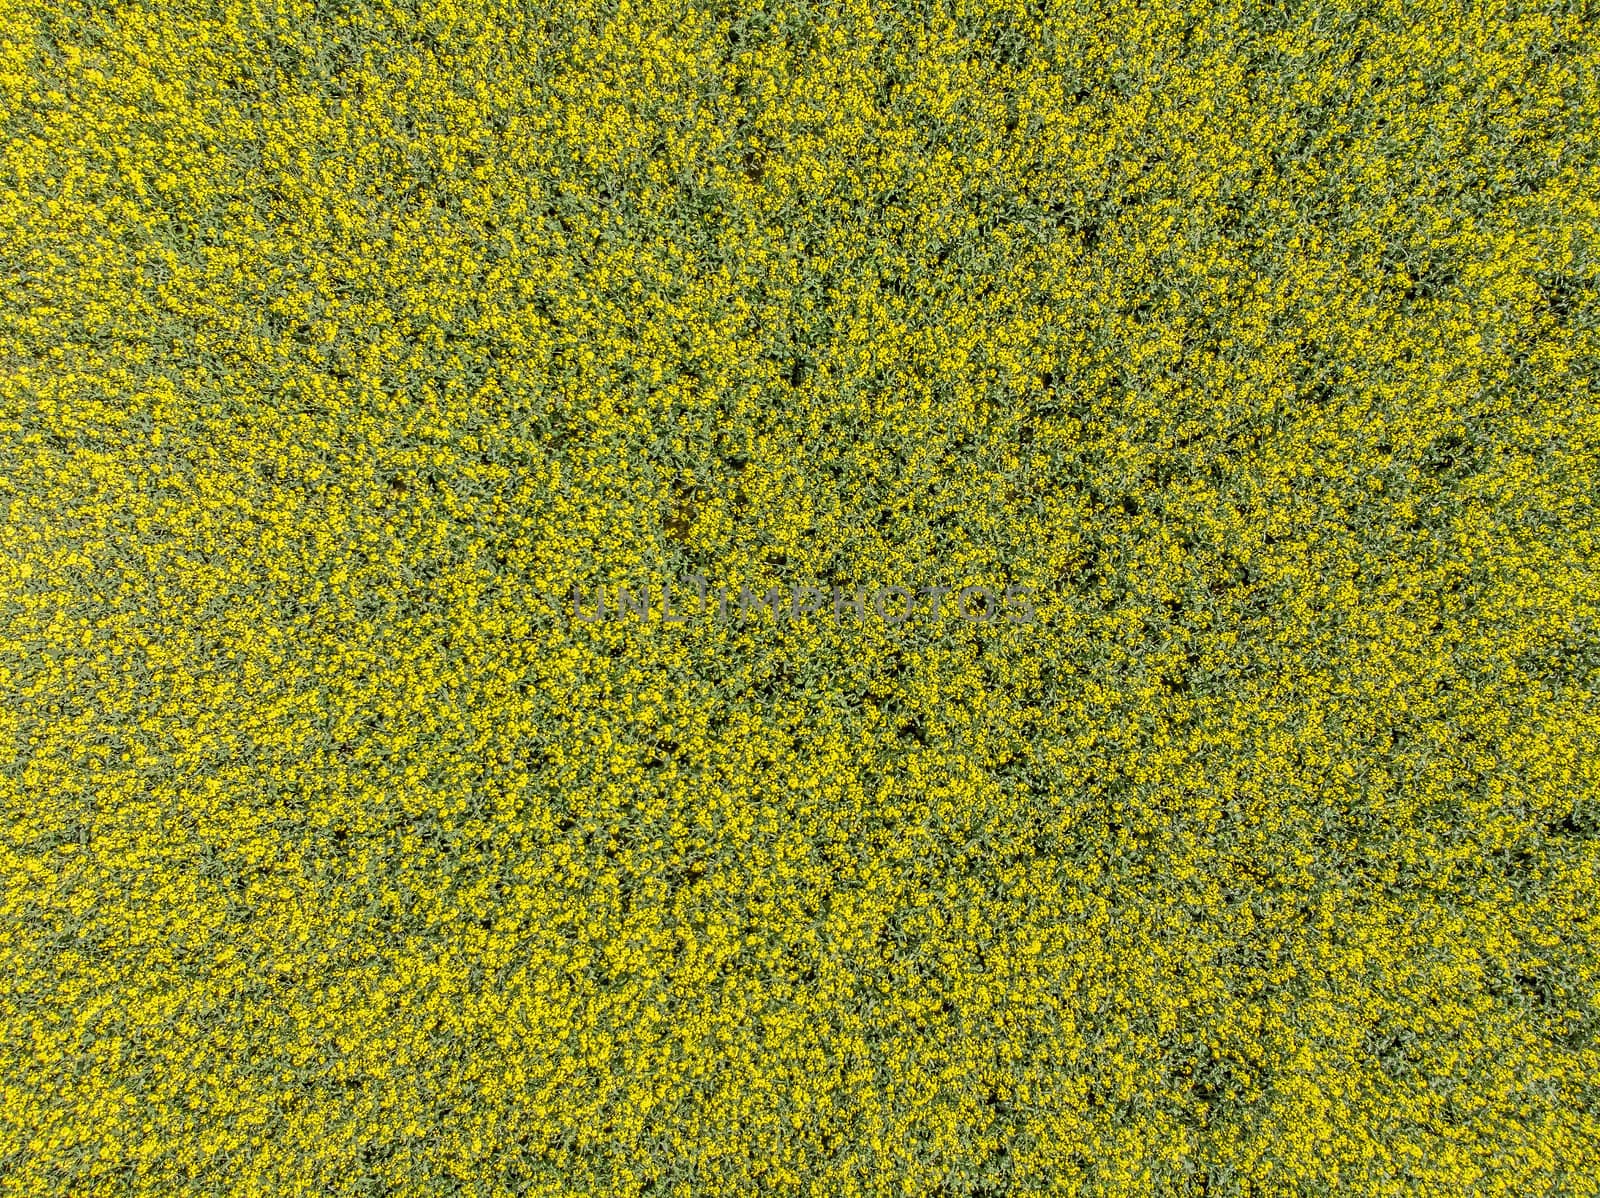 Aerial view of a field with yellow rape in bloom on a field as background, made with drone